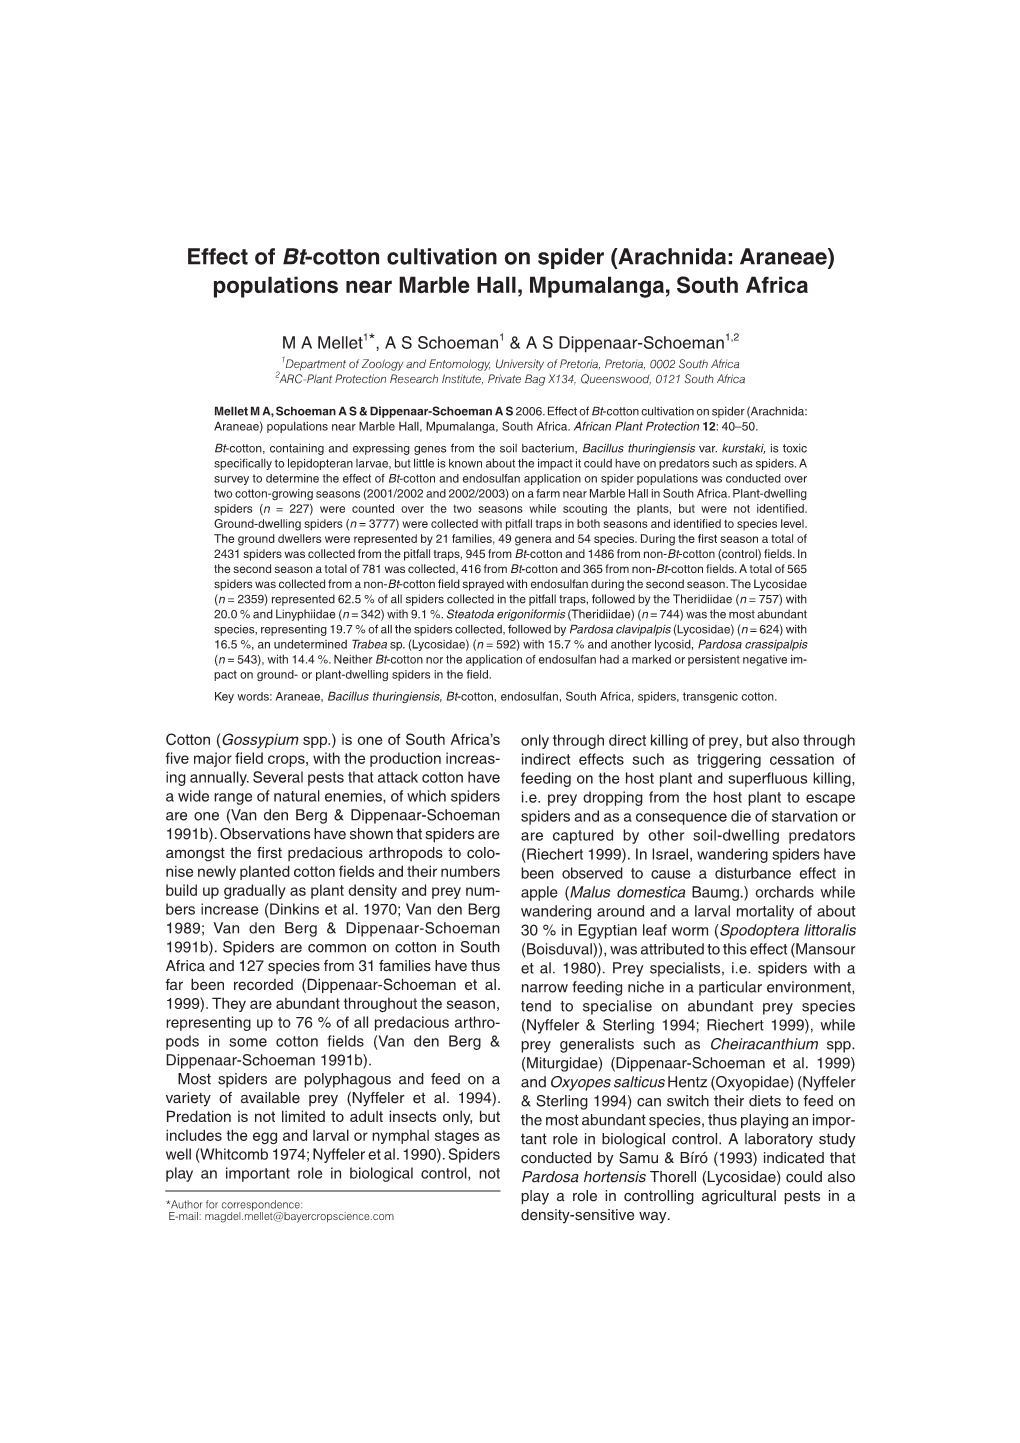 The Effect of Bt-Cotton Cultivation on Spider Populations.Pdf